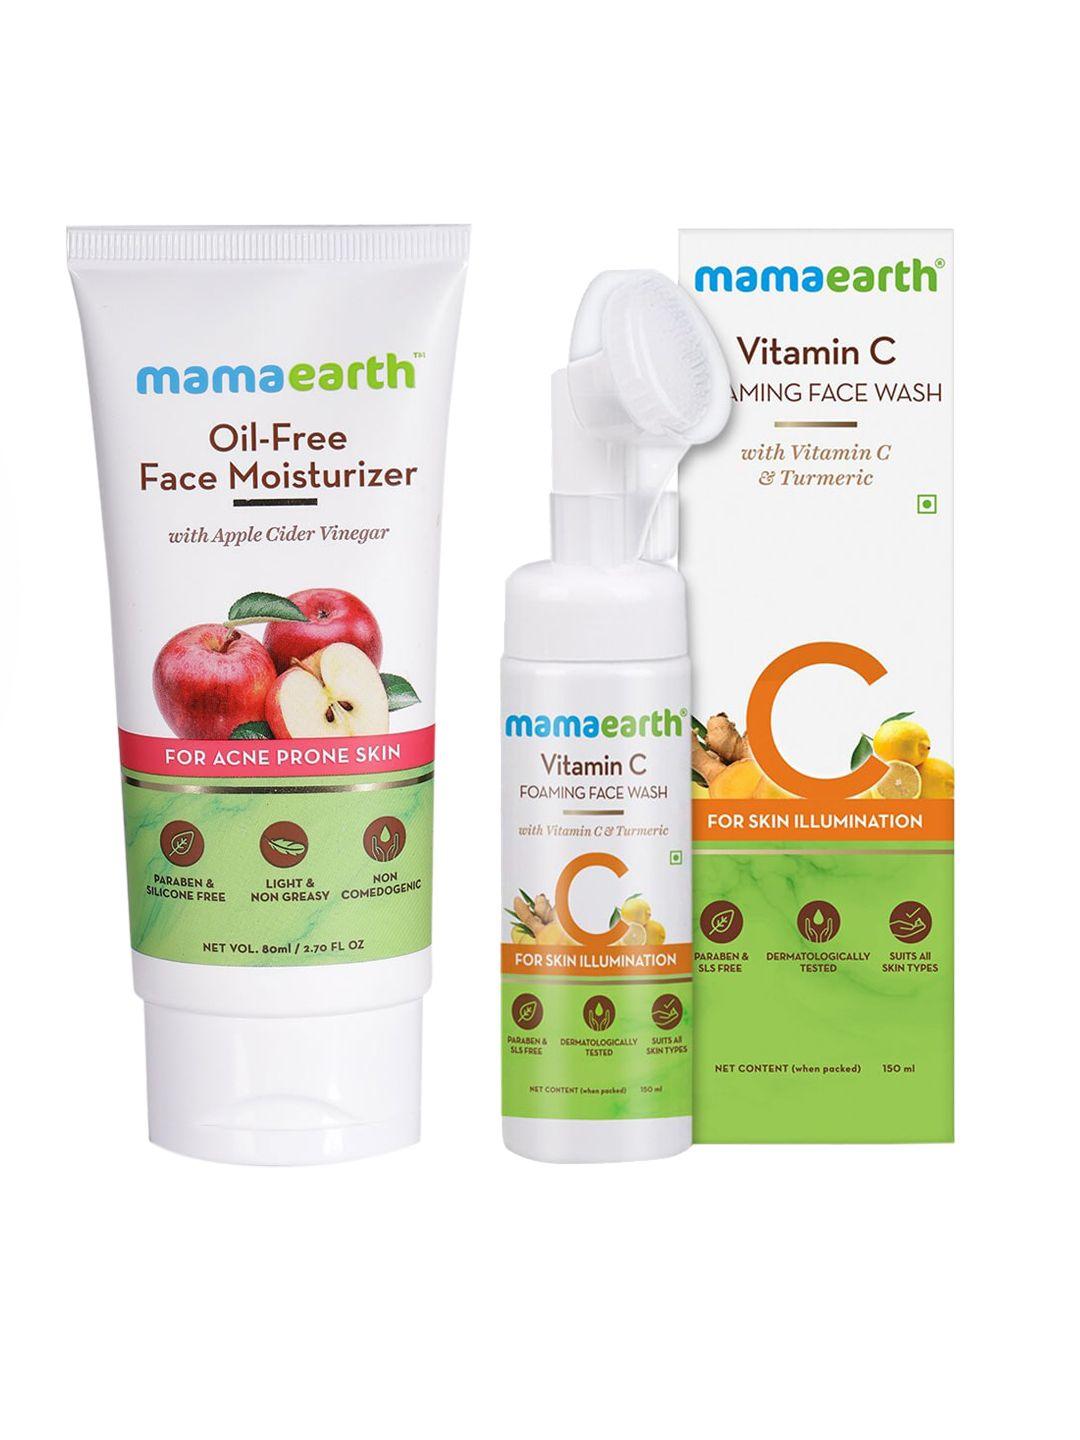 mamaearth set of sustainable vitamin c face wash & oil-free face moisturizer